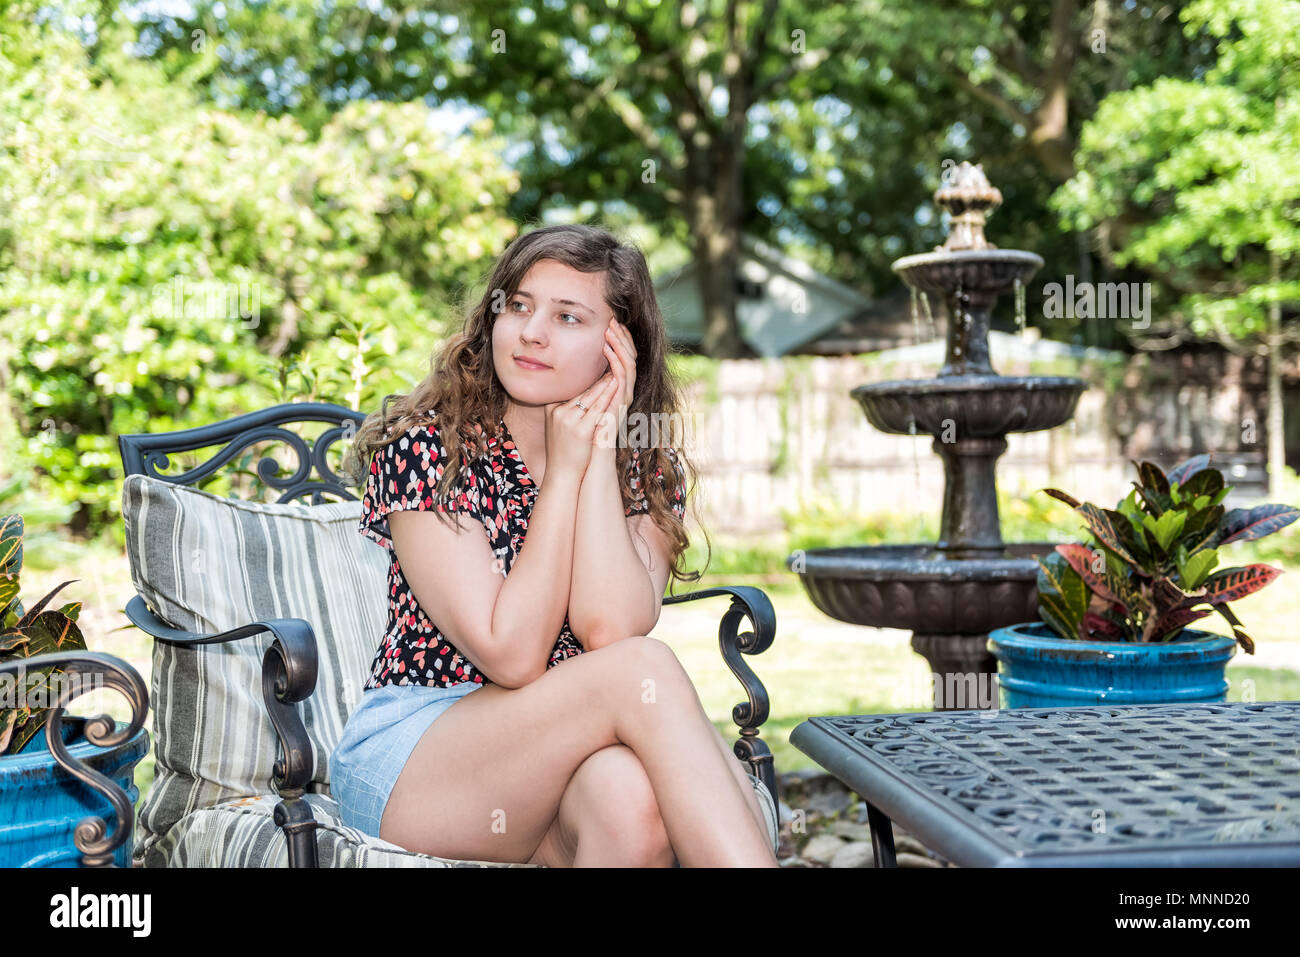 Young woman sitting on patio chair in outdoor spring garden in backyard porch of home happy smiling zen with fountain, table, plants Stock Photo